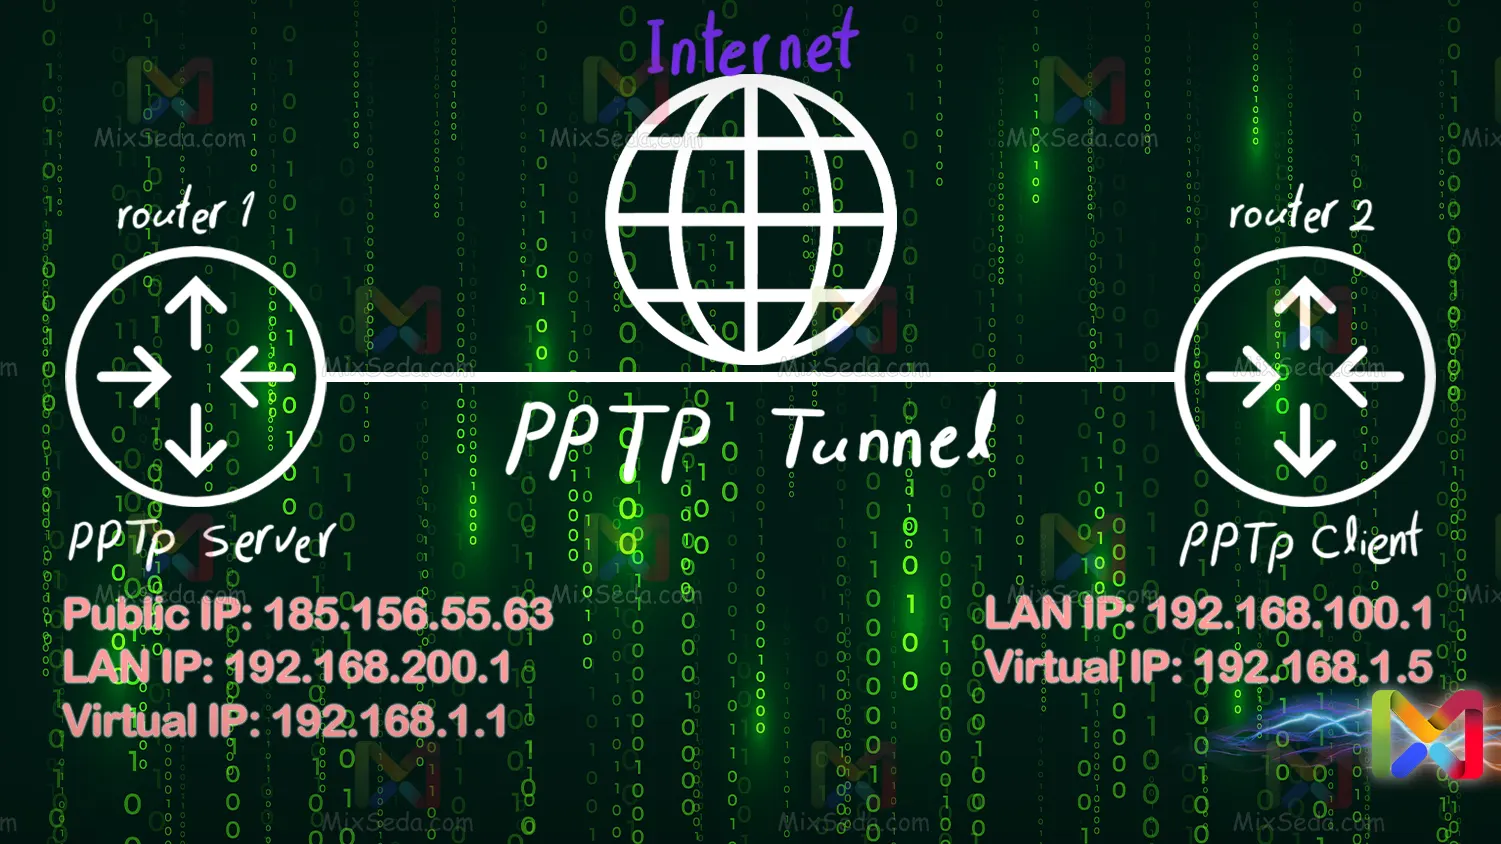 Point-to-Point Tunneling Protocol